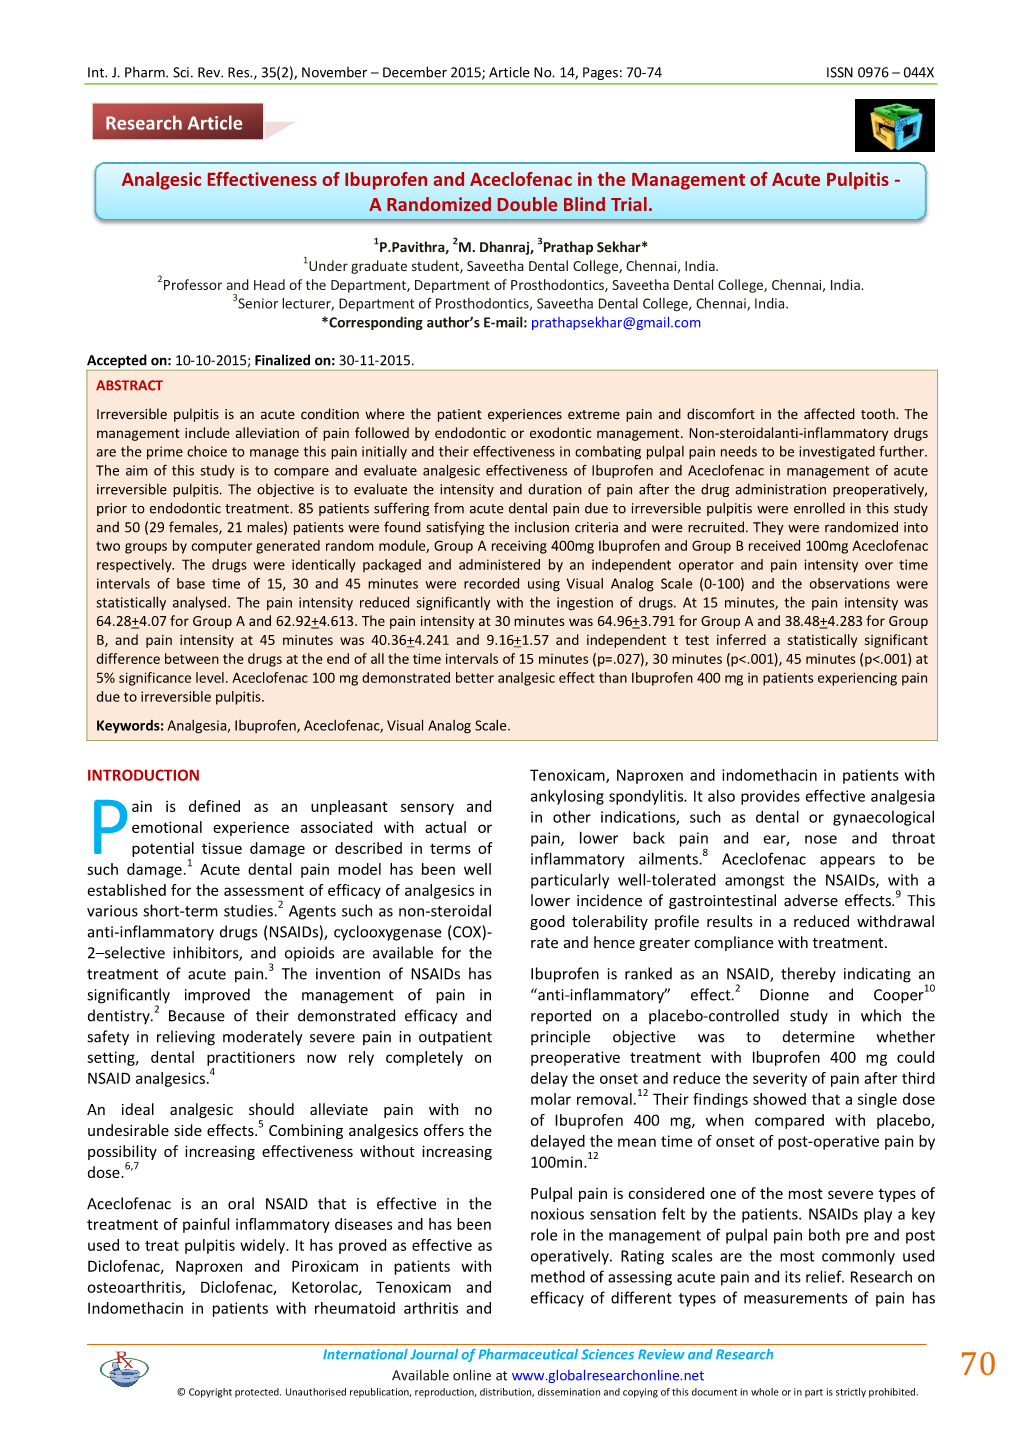 Analgesic Effectiveness of Ibuprofen and Aceclofenac in the Management of Acute Pulpitis - a Randomized Double Blind Trial